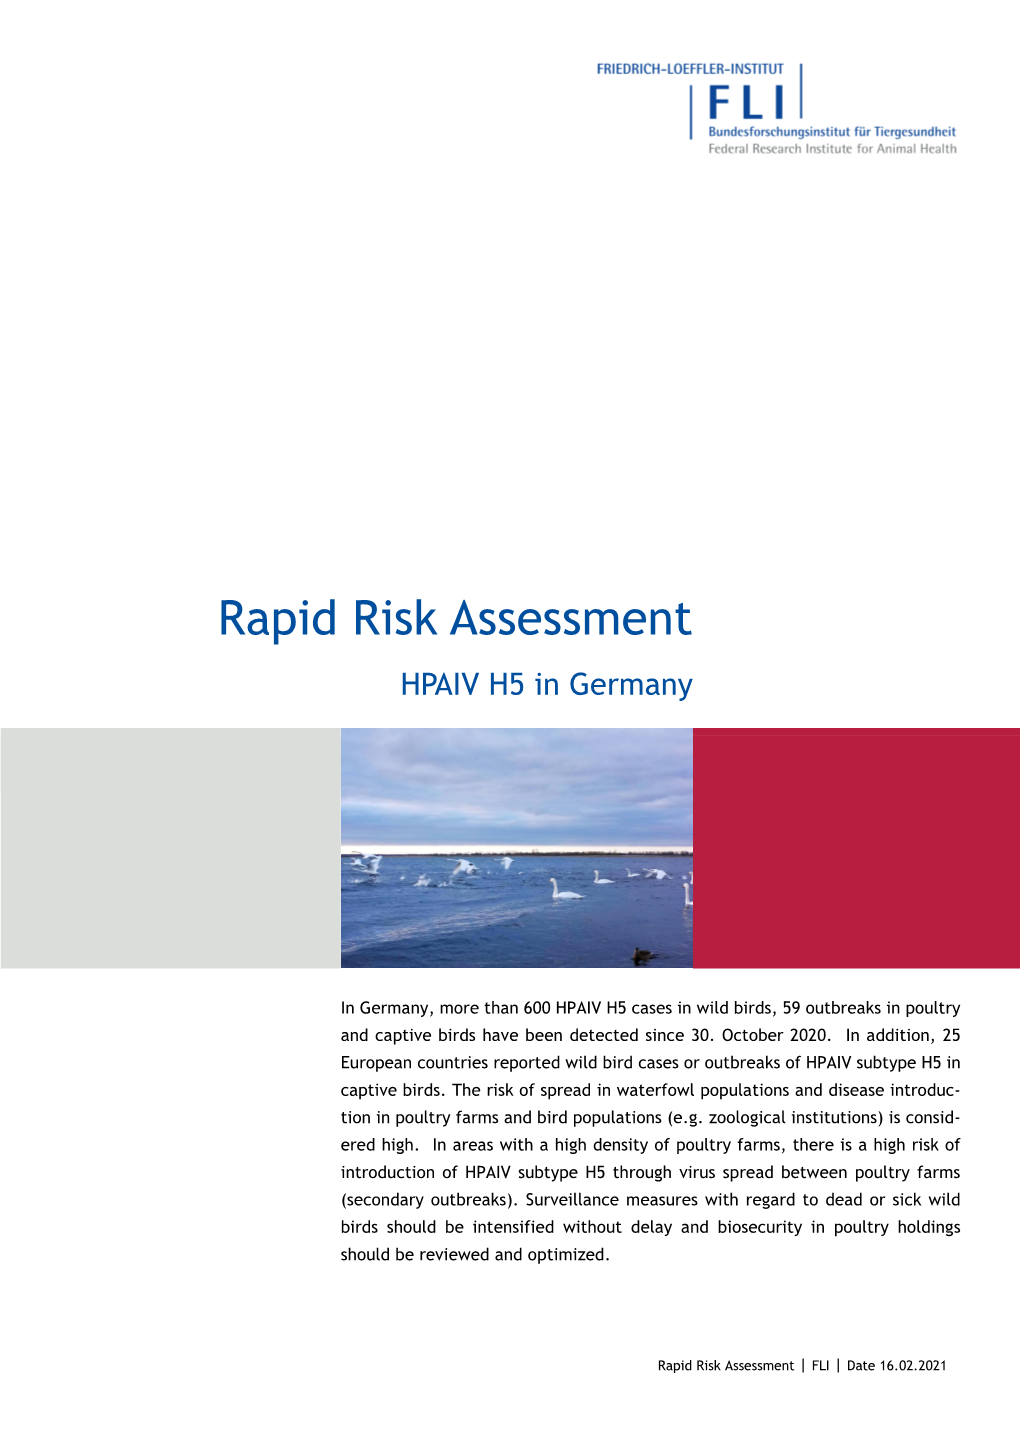 Rapid Risk Assessment HPAIV H5 in Germany, Date February 16, 2021